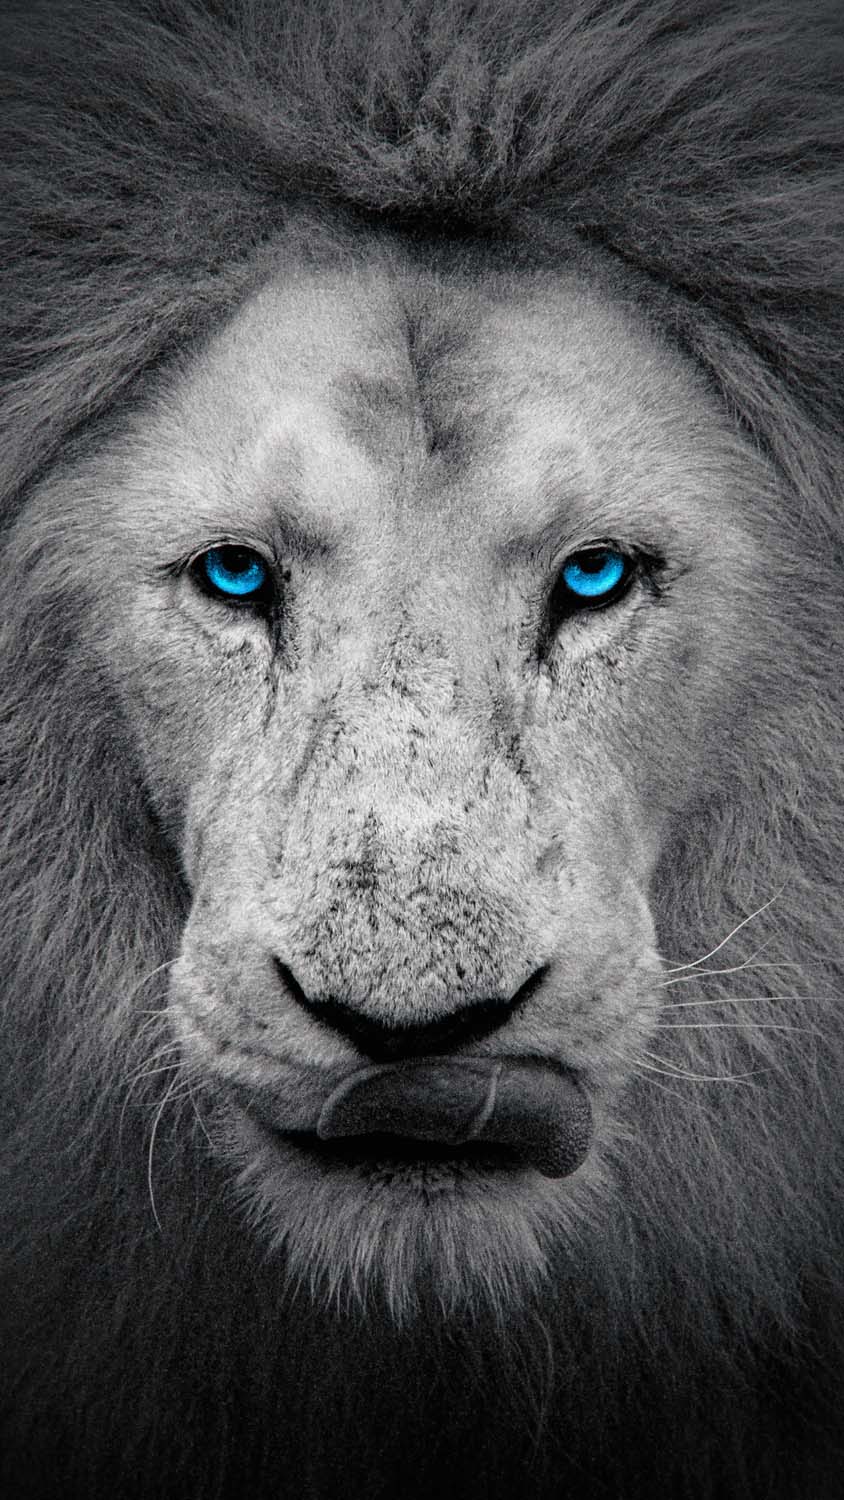 White Lion IPhone Wallpaper HD - IPhone Wallpapers : iPhone Wallpapers